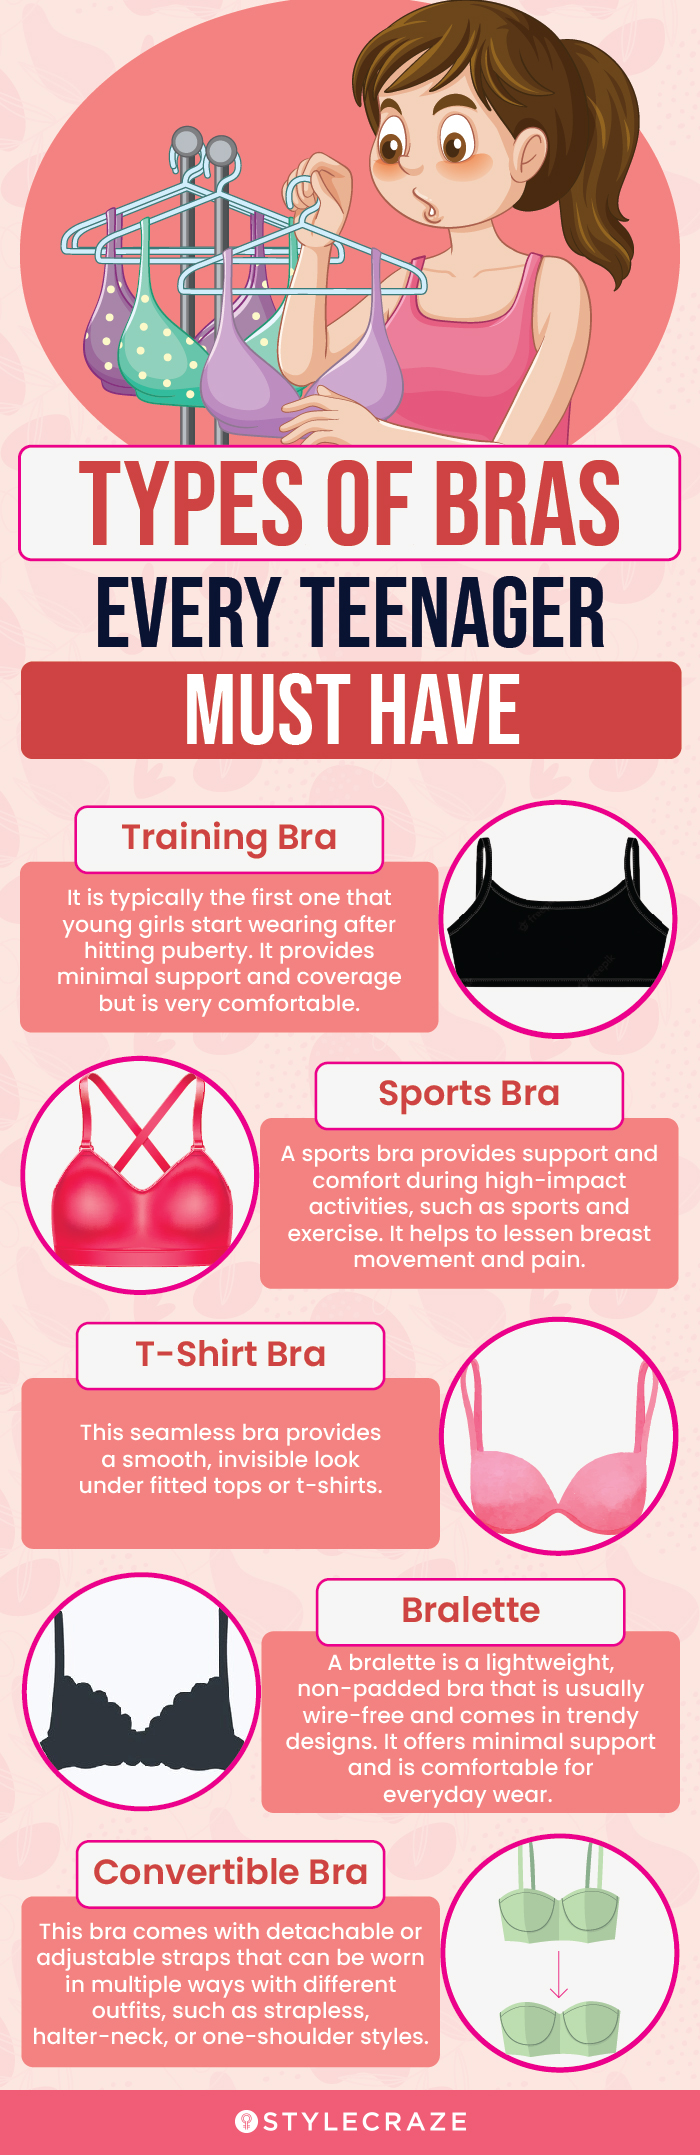 Types Of Bras Every Teenager Must Have (infographic)